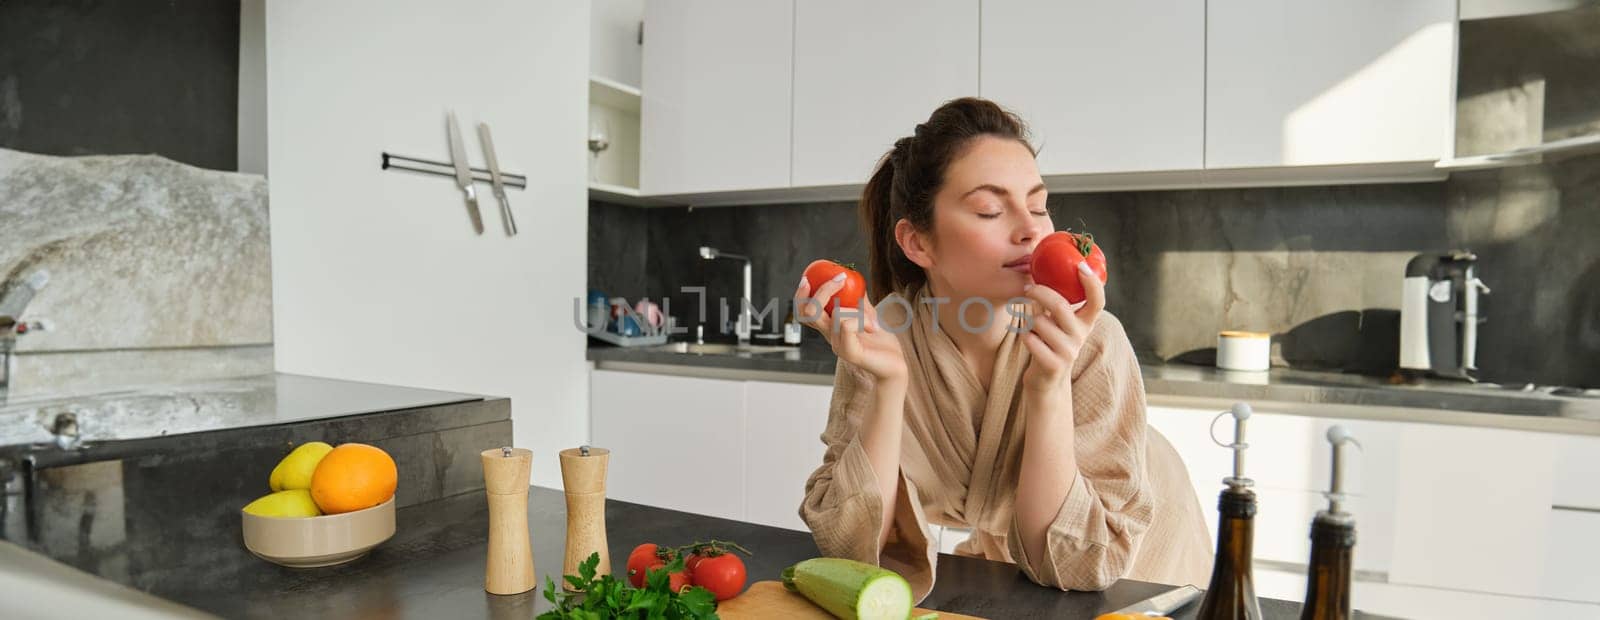 Portrait of beautiful young woman smelling tomatoes, cooking salad from fresh vegetables bought in market, preparing food for family, lead active and healthy lifestyle, standing in kitchen.